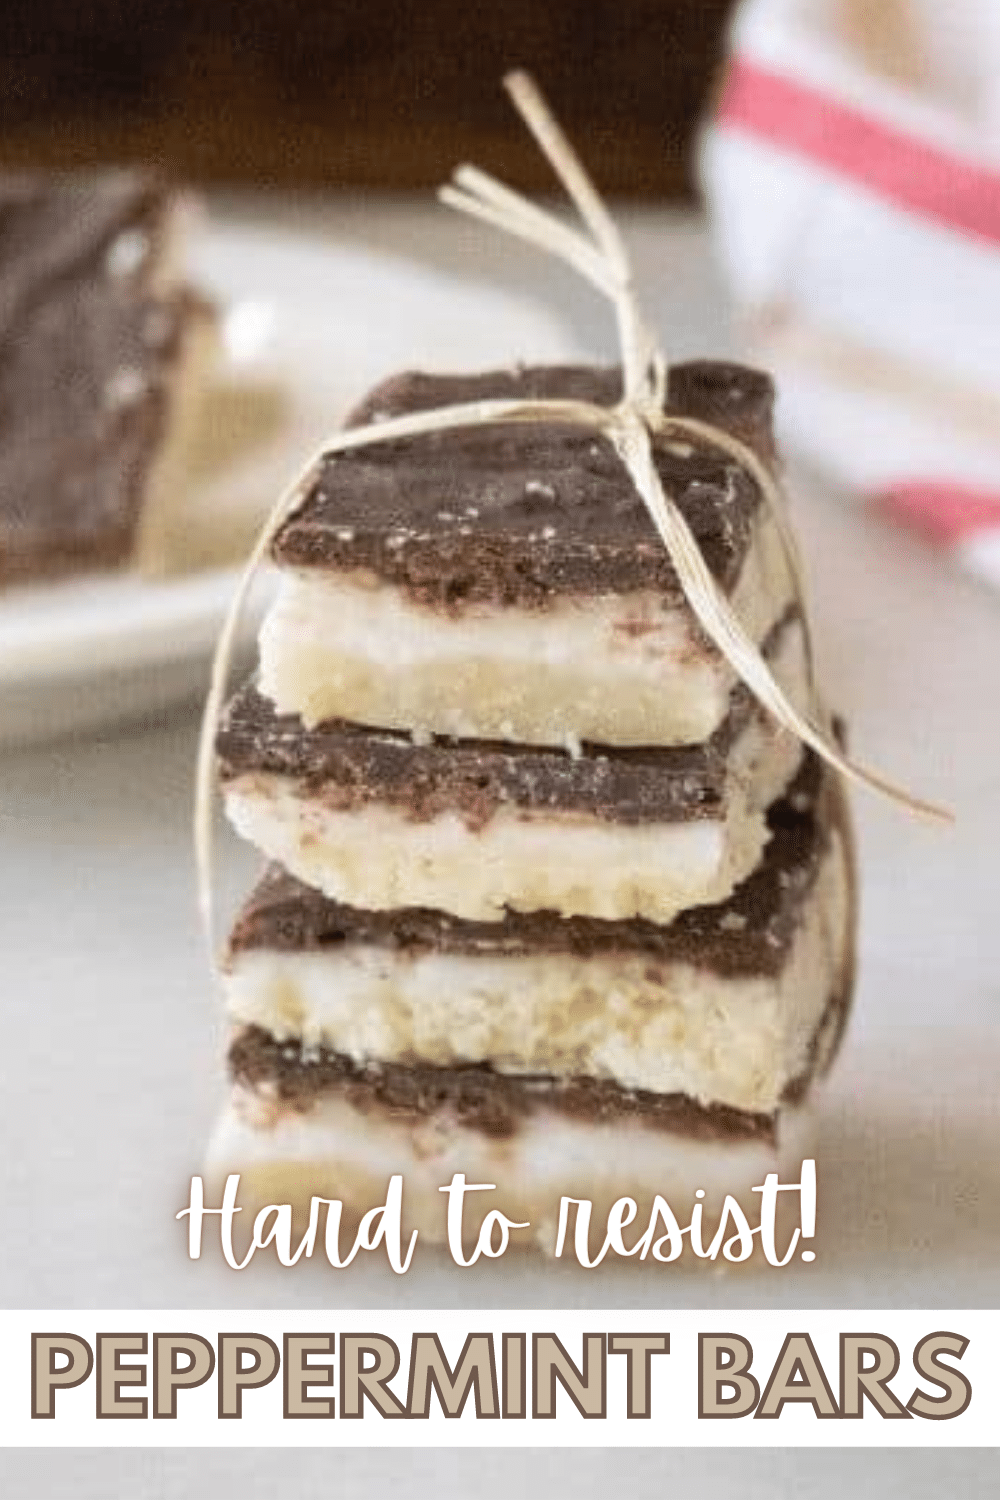 4 slices of Peppermint Bars stacked and tied together.